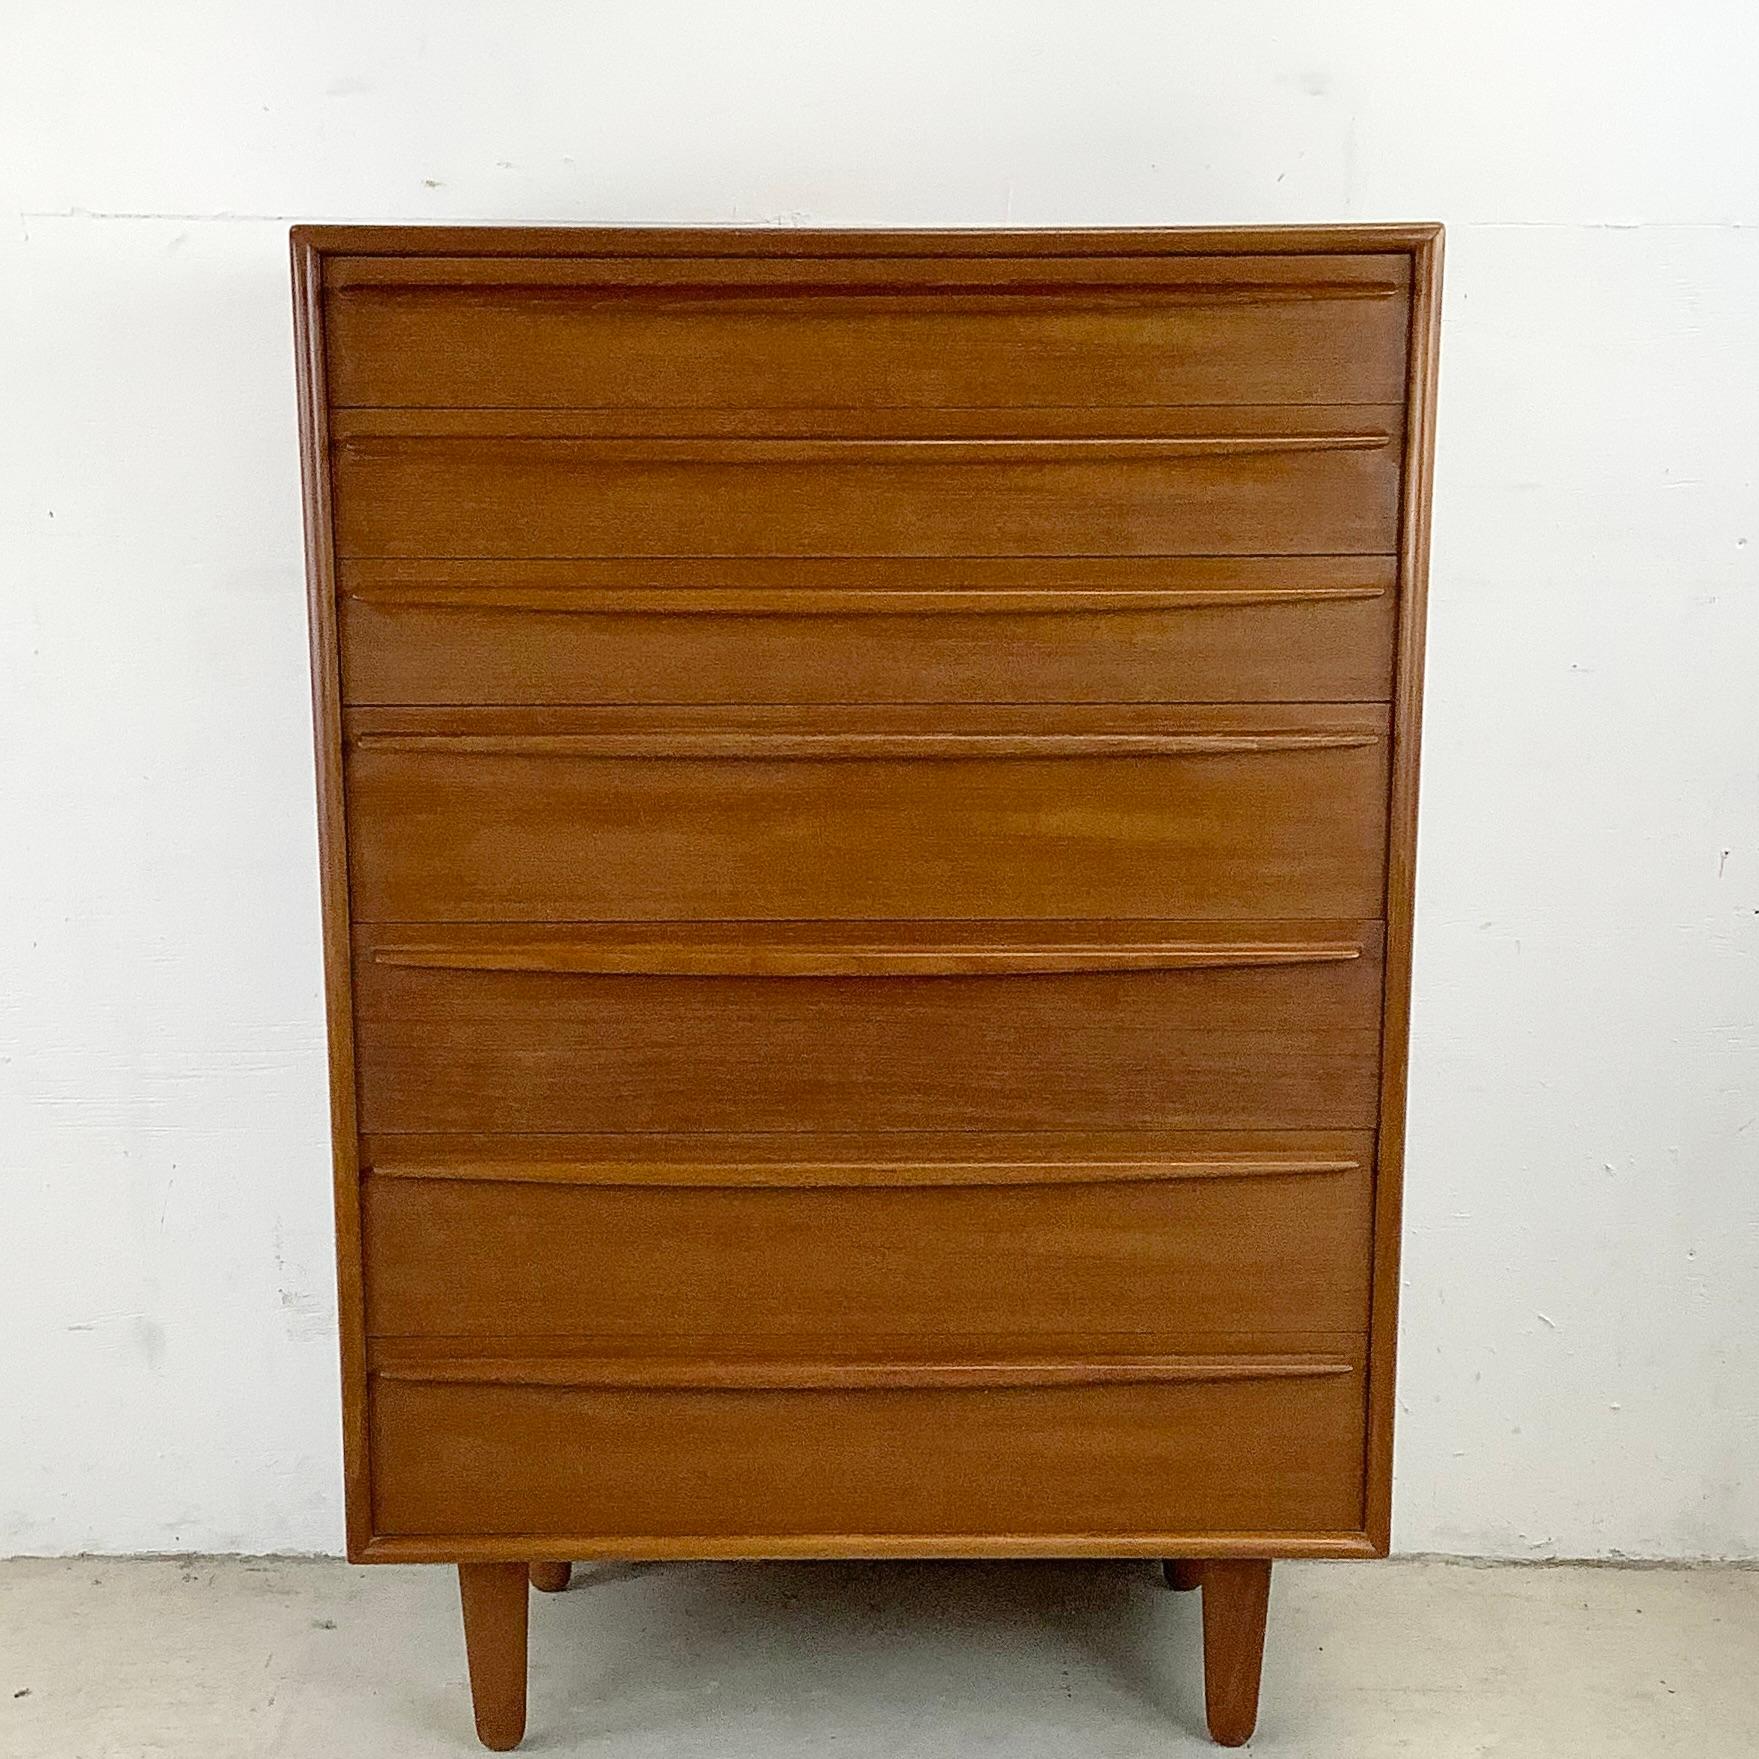 Beautiful Scandinavian modern highboy dresser from Lyby Mobler features a set of seven dovetailed drawers. The stylish Danish modern dresser offers plenty of storage in a striking vintage teak package. The quality Danish manufacture, clean modern